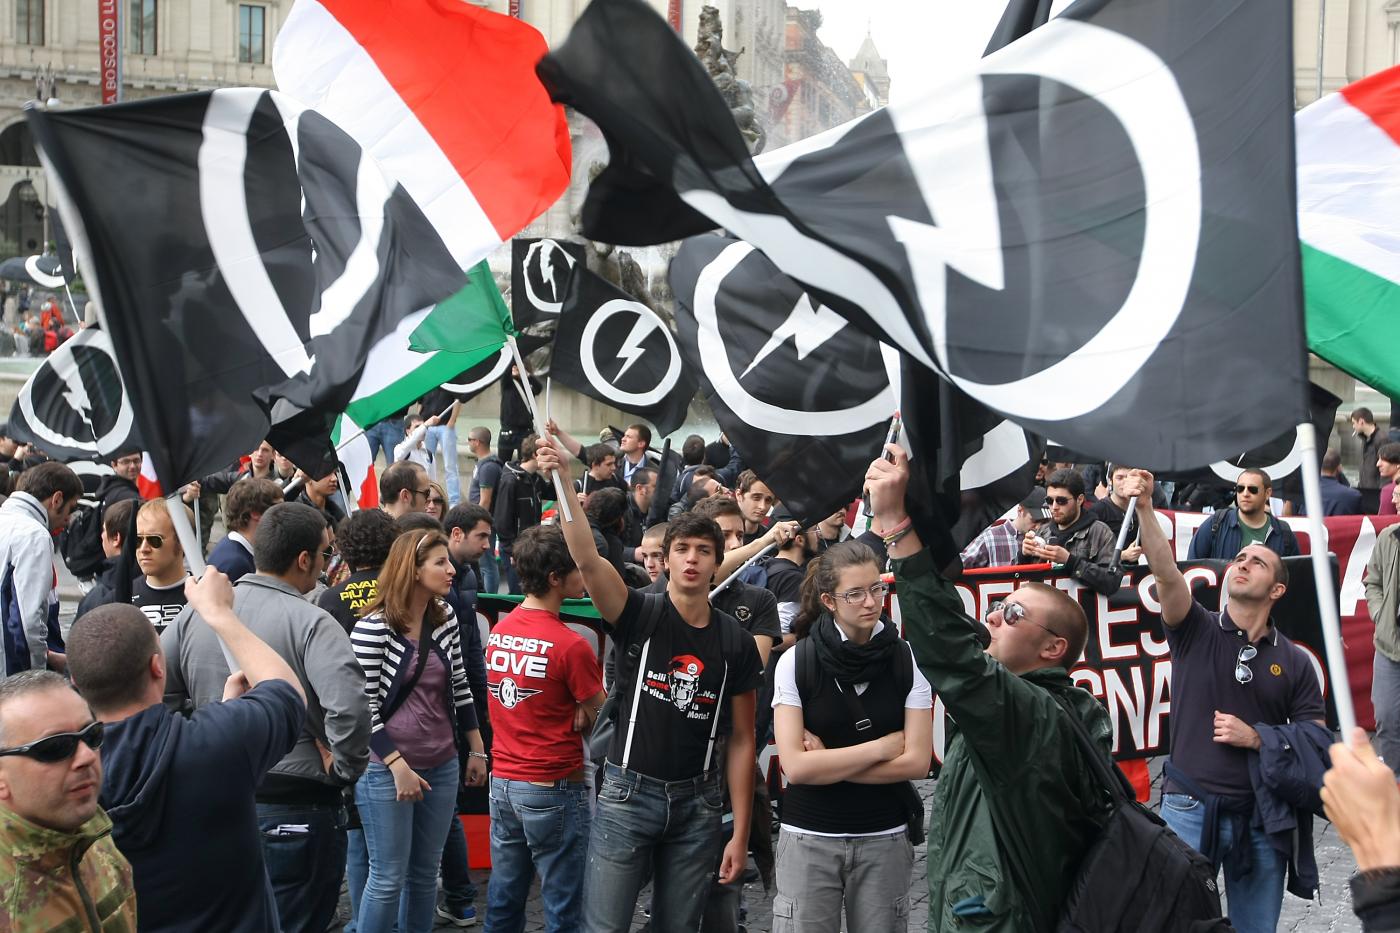 Young Italian Fascists affiliated with CasaPound